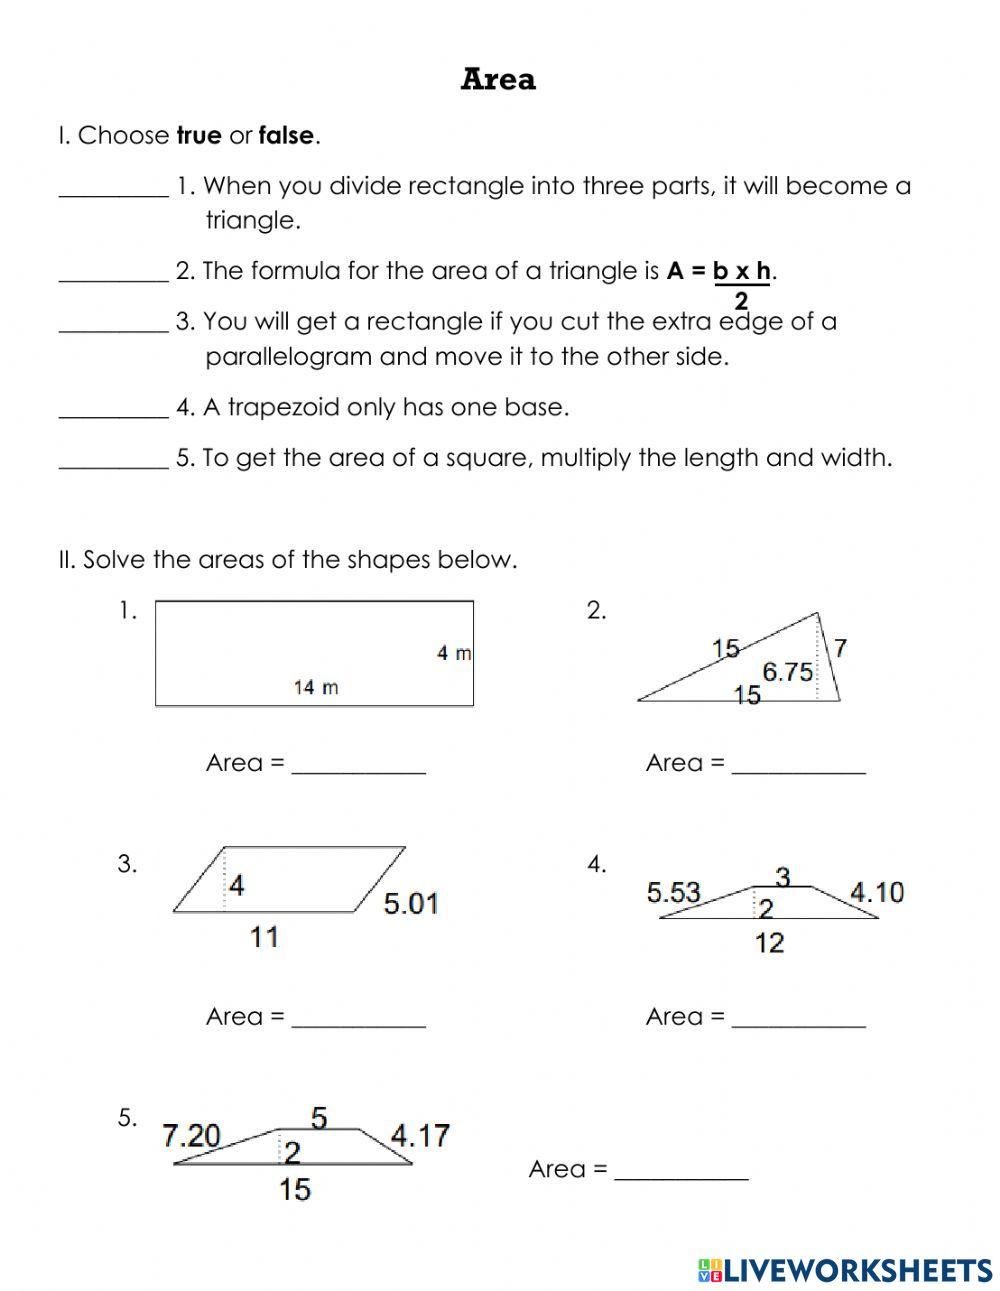 Area of triangles and trapezoids